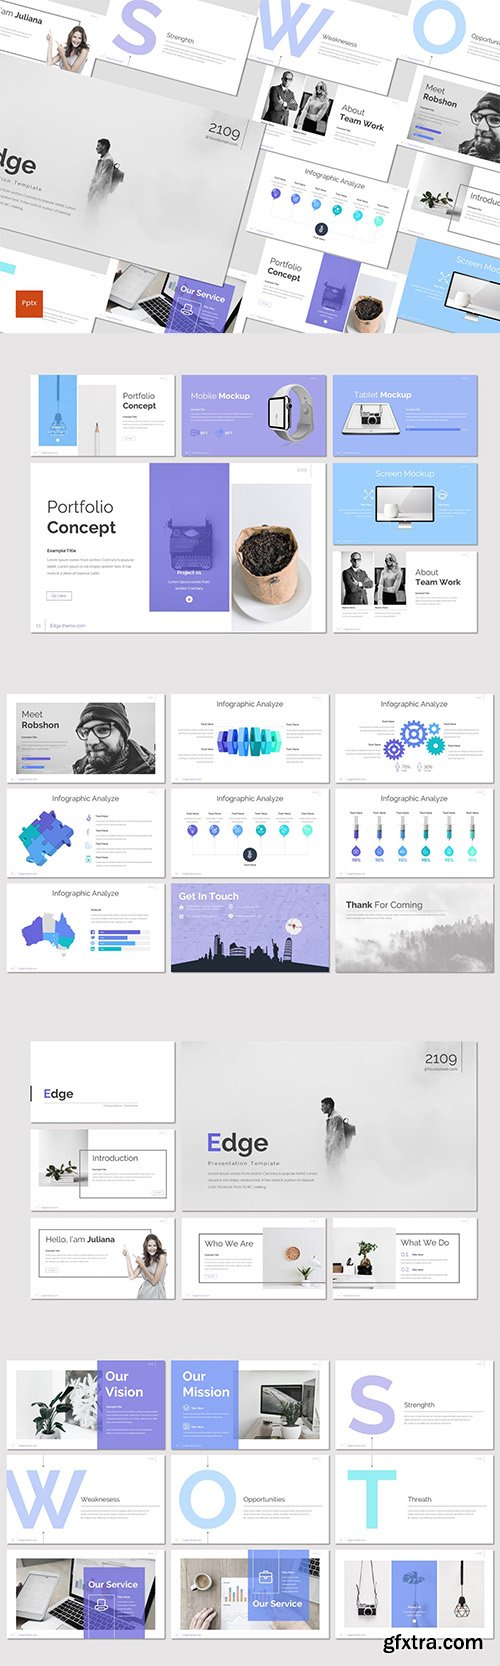 Edge - Powerpoint, Keynote and Google Slides Templates